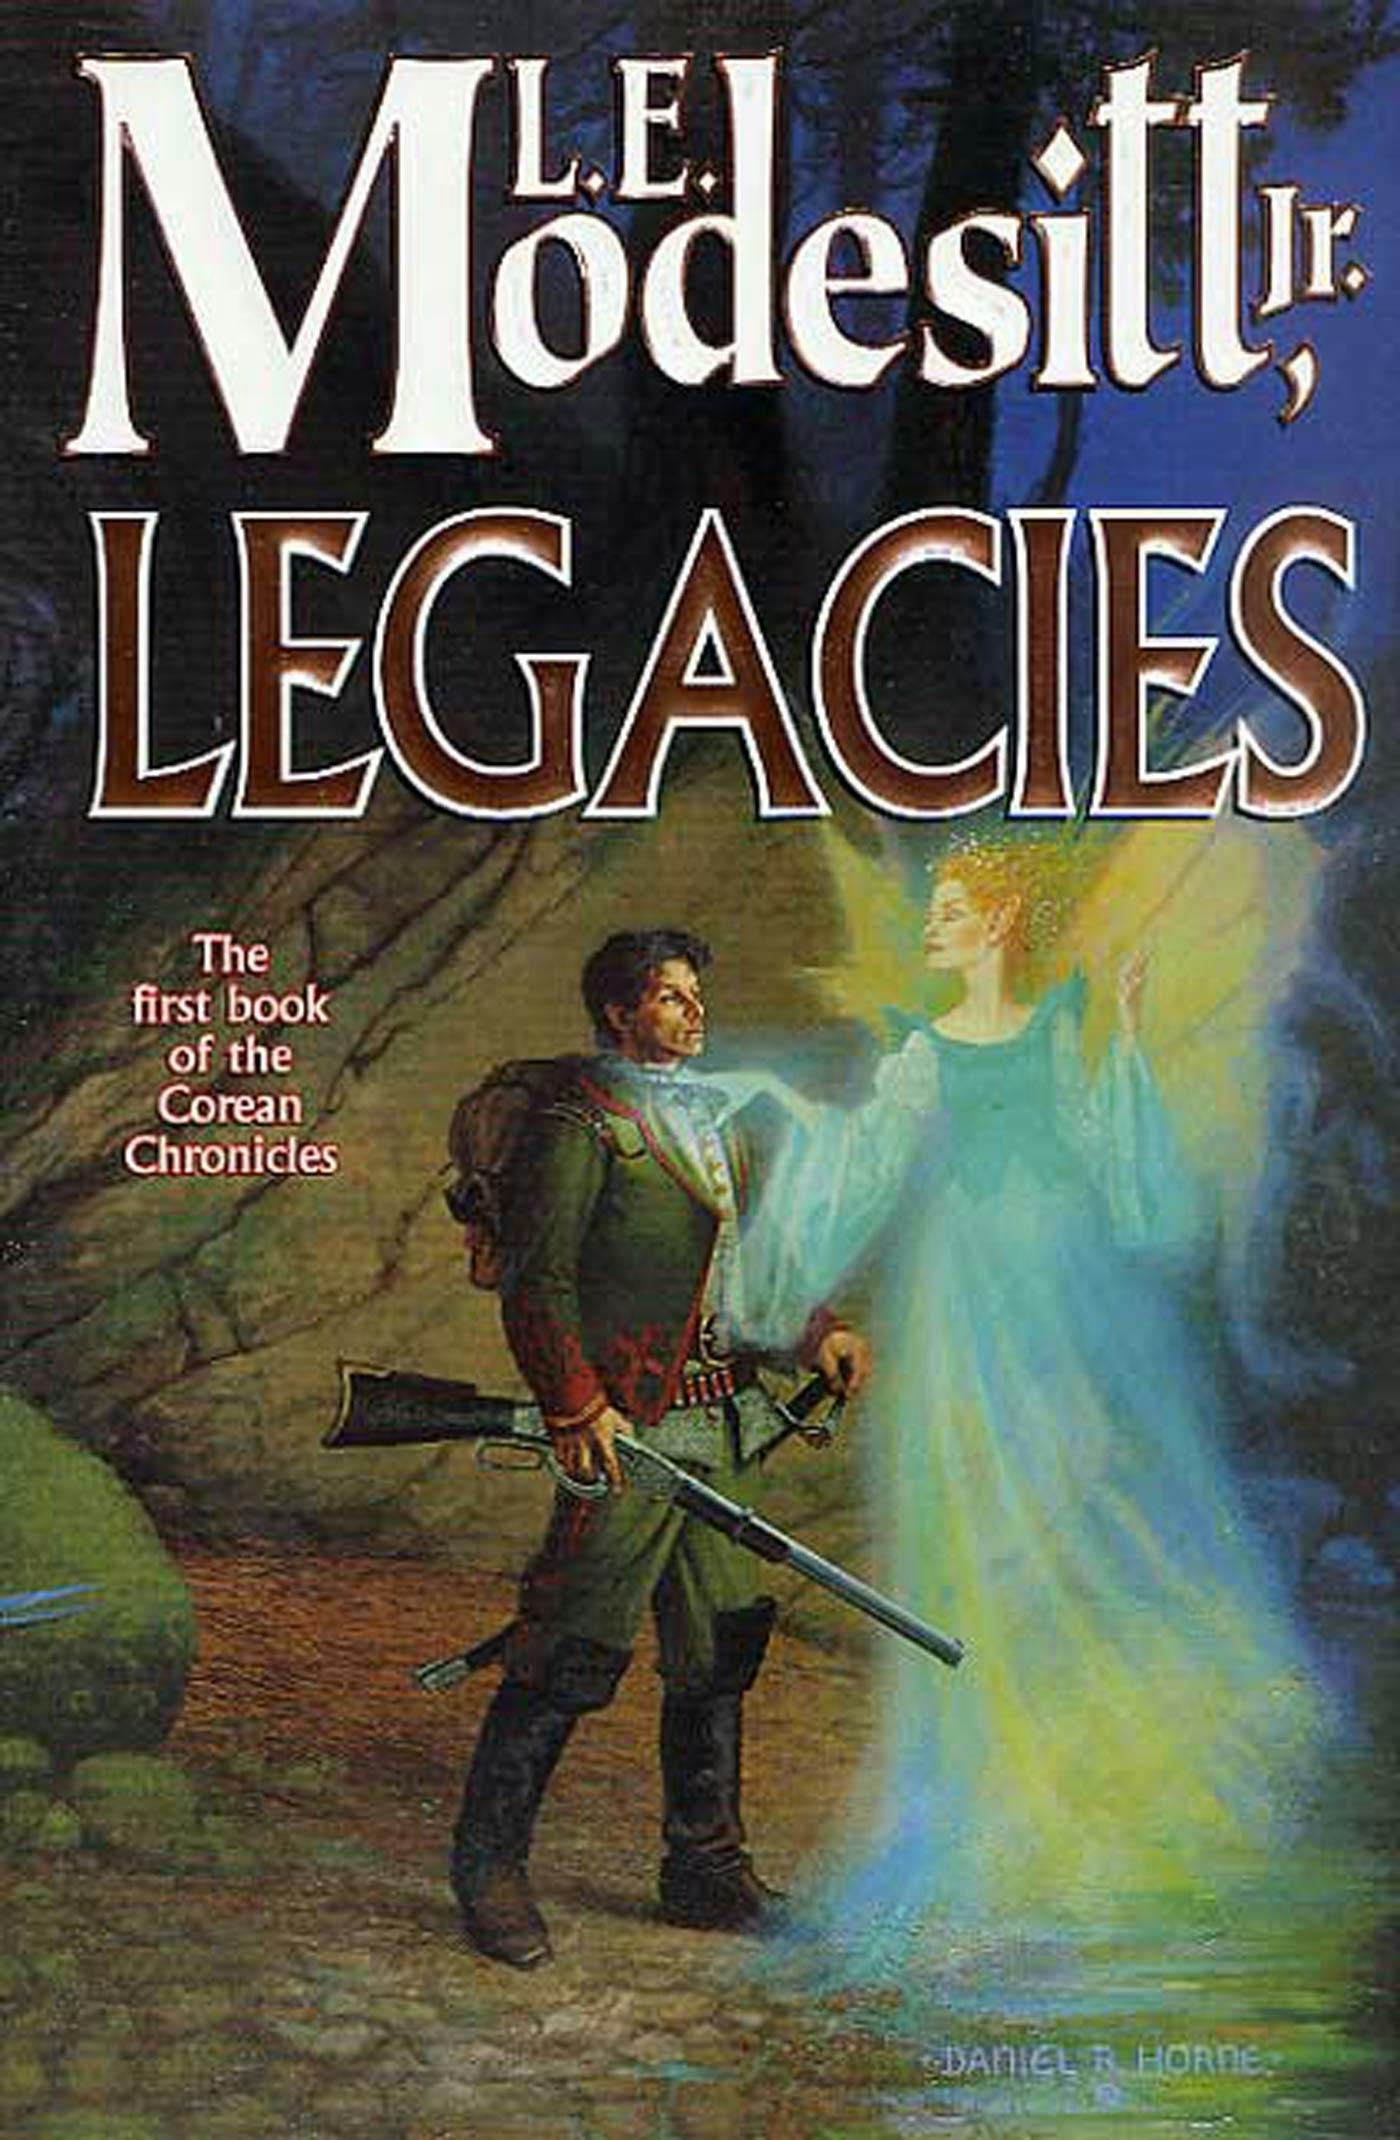 Cover for the book titled as: Legacies